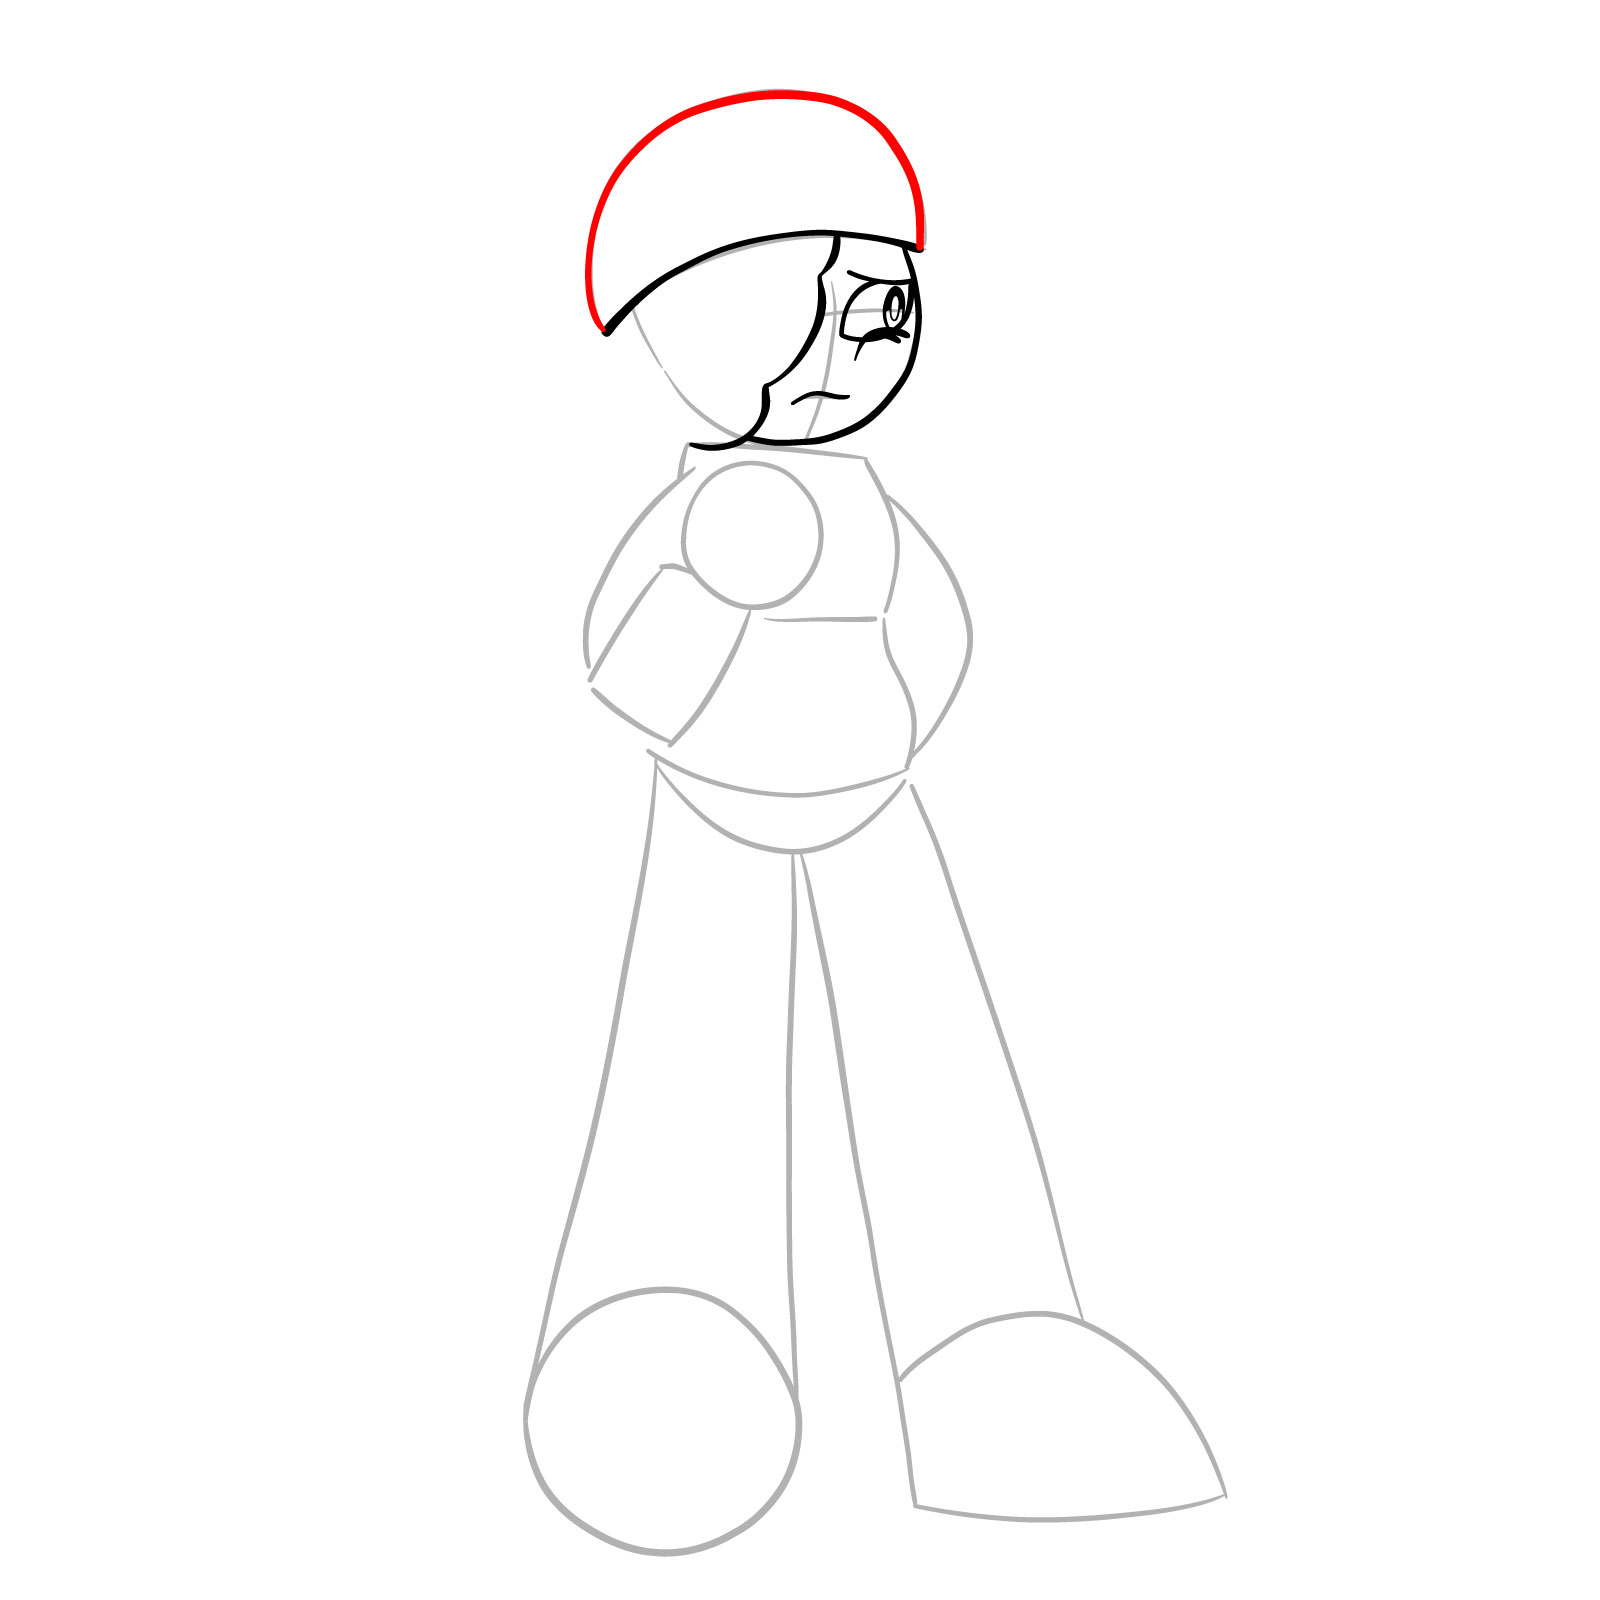 How to draw Ruby from FNF - step 11